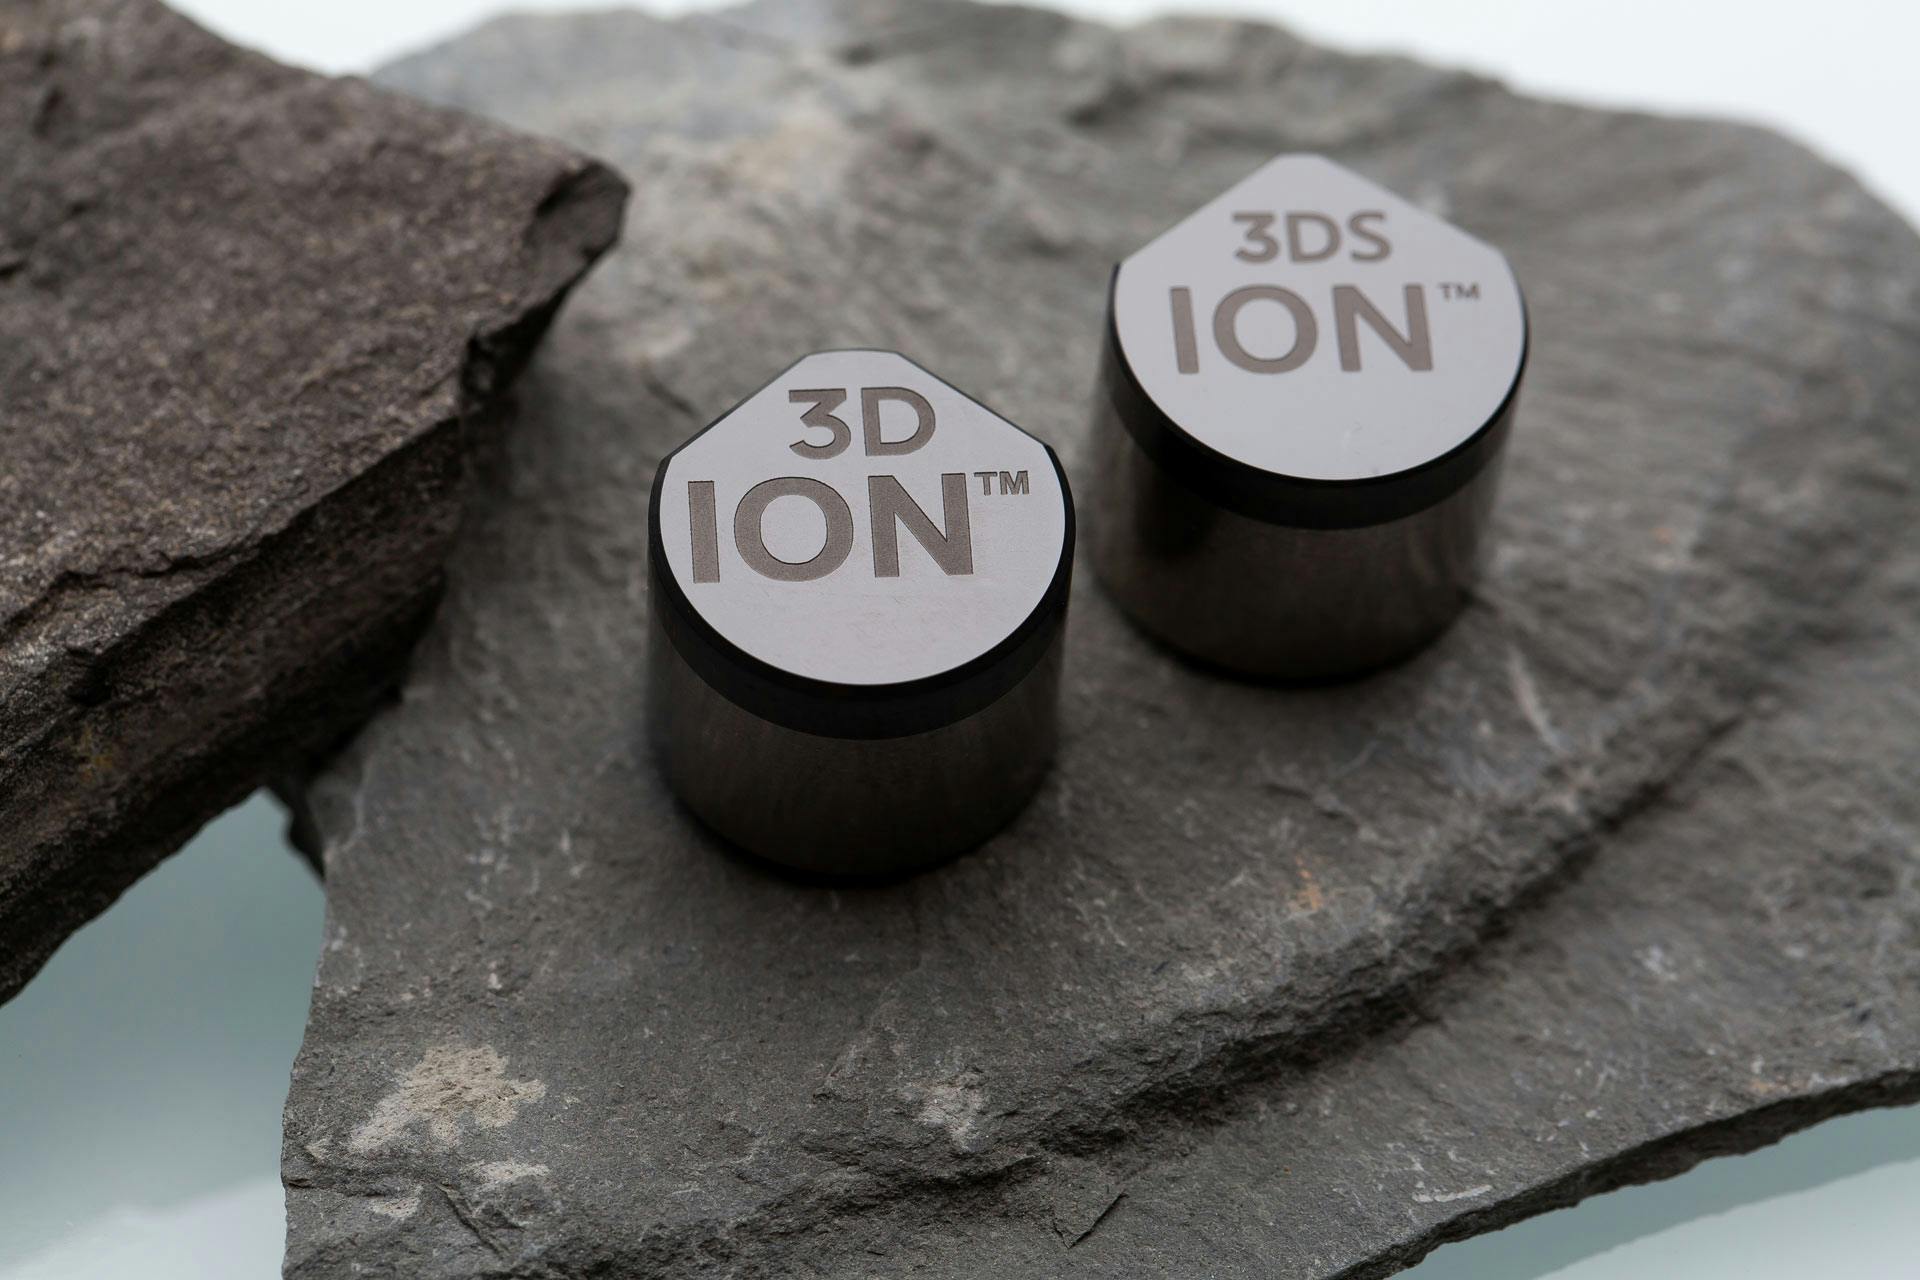 An ION 3D and an ION 3DS Cutter rest on a rock